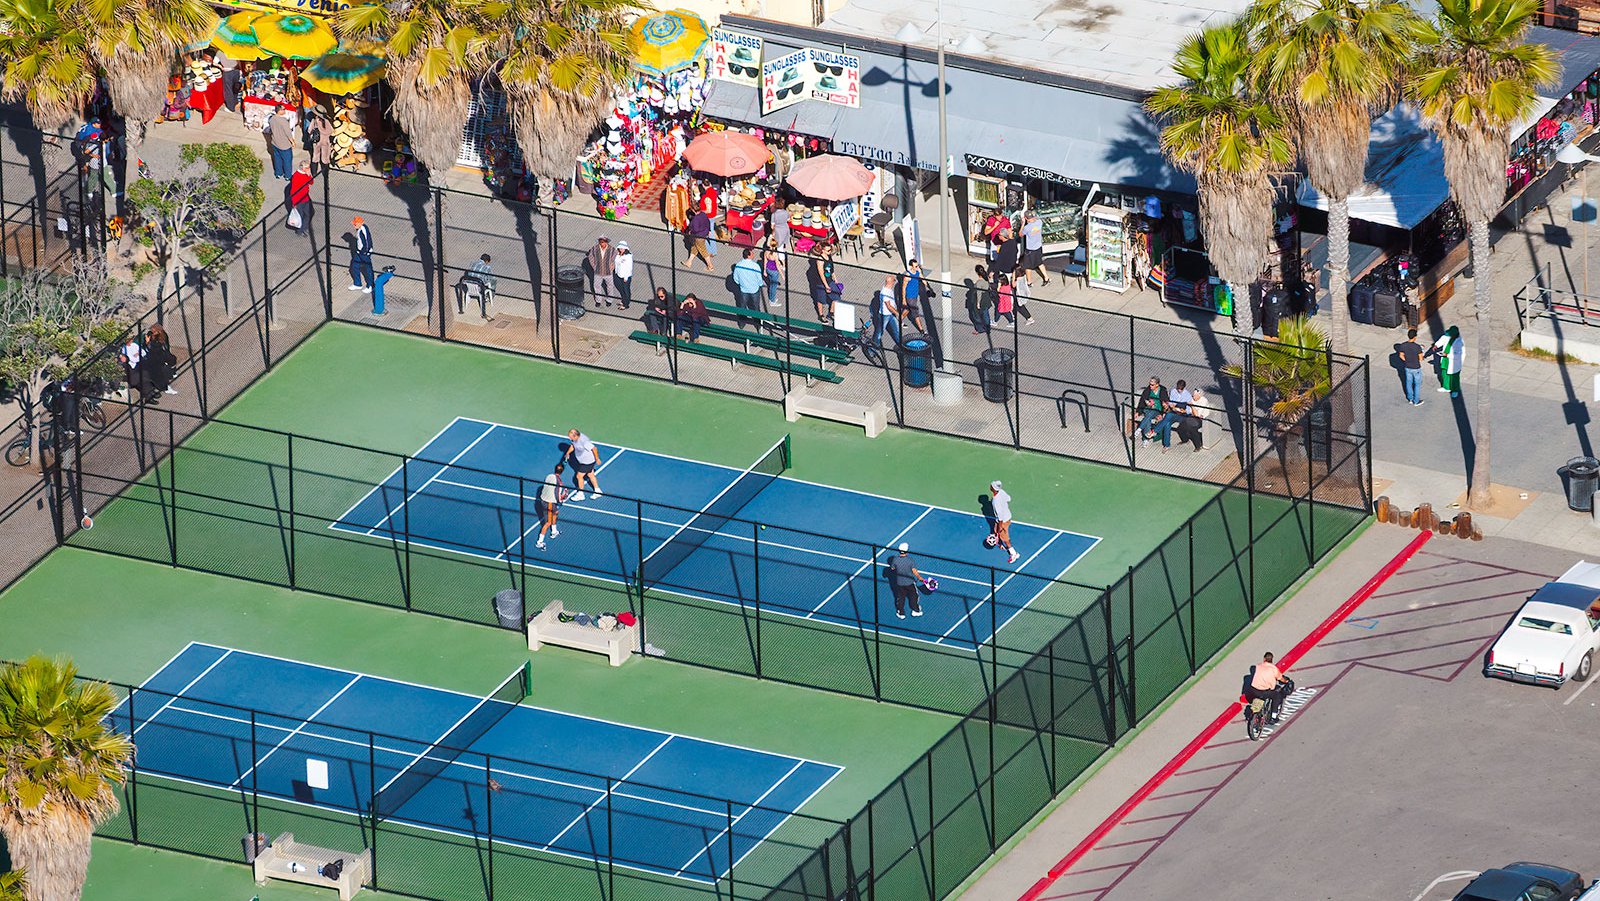 Blog photograph of the paddle tennis courts in Venice Beach on Christmas Day in Los Angeles, California